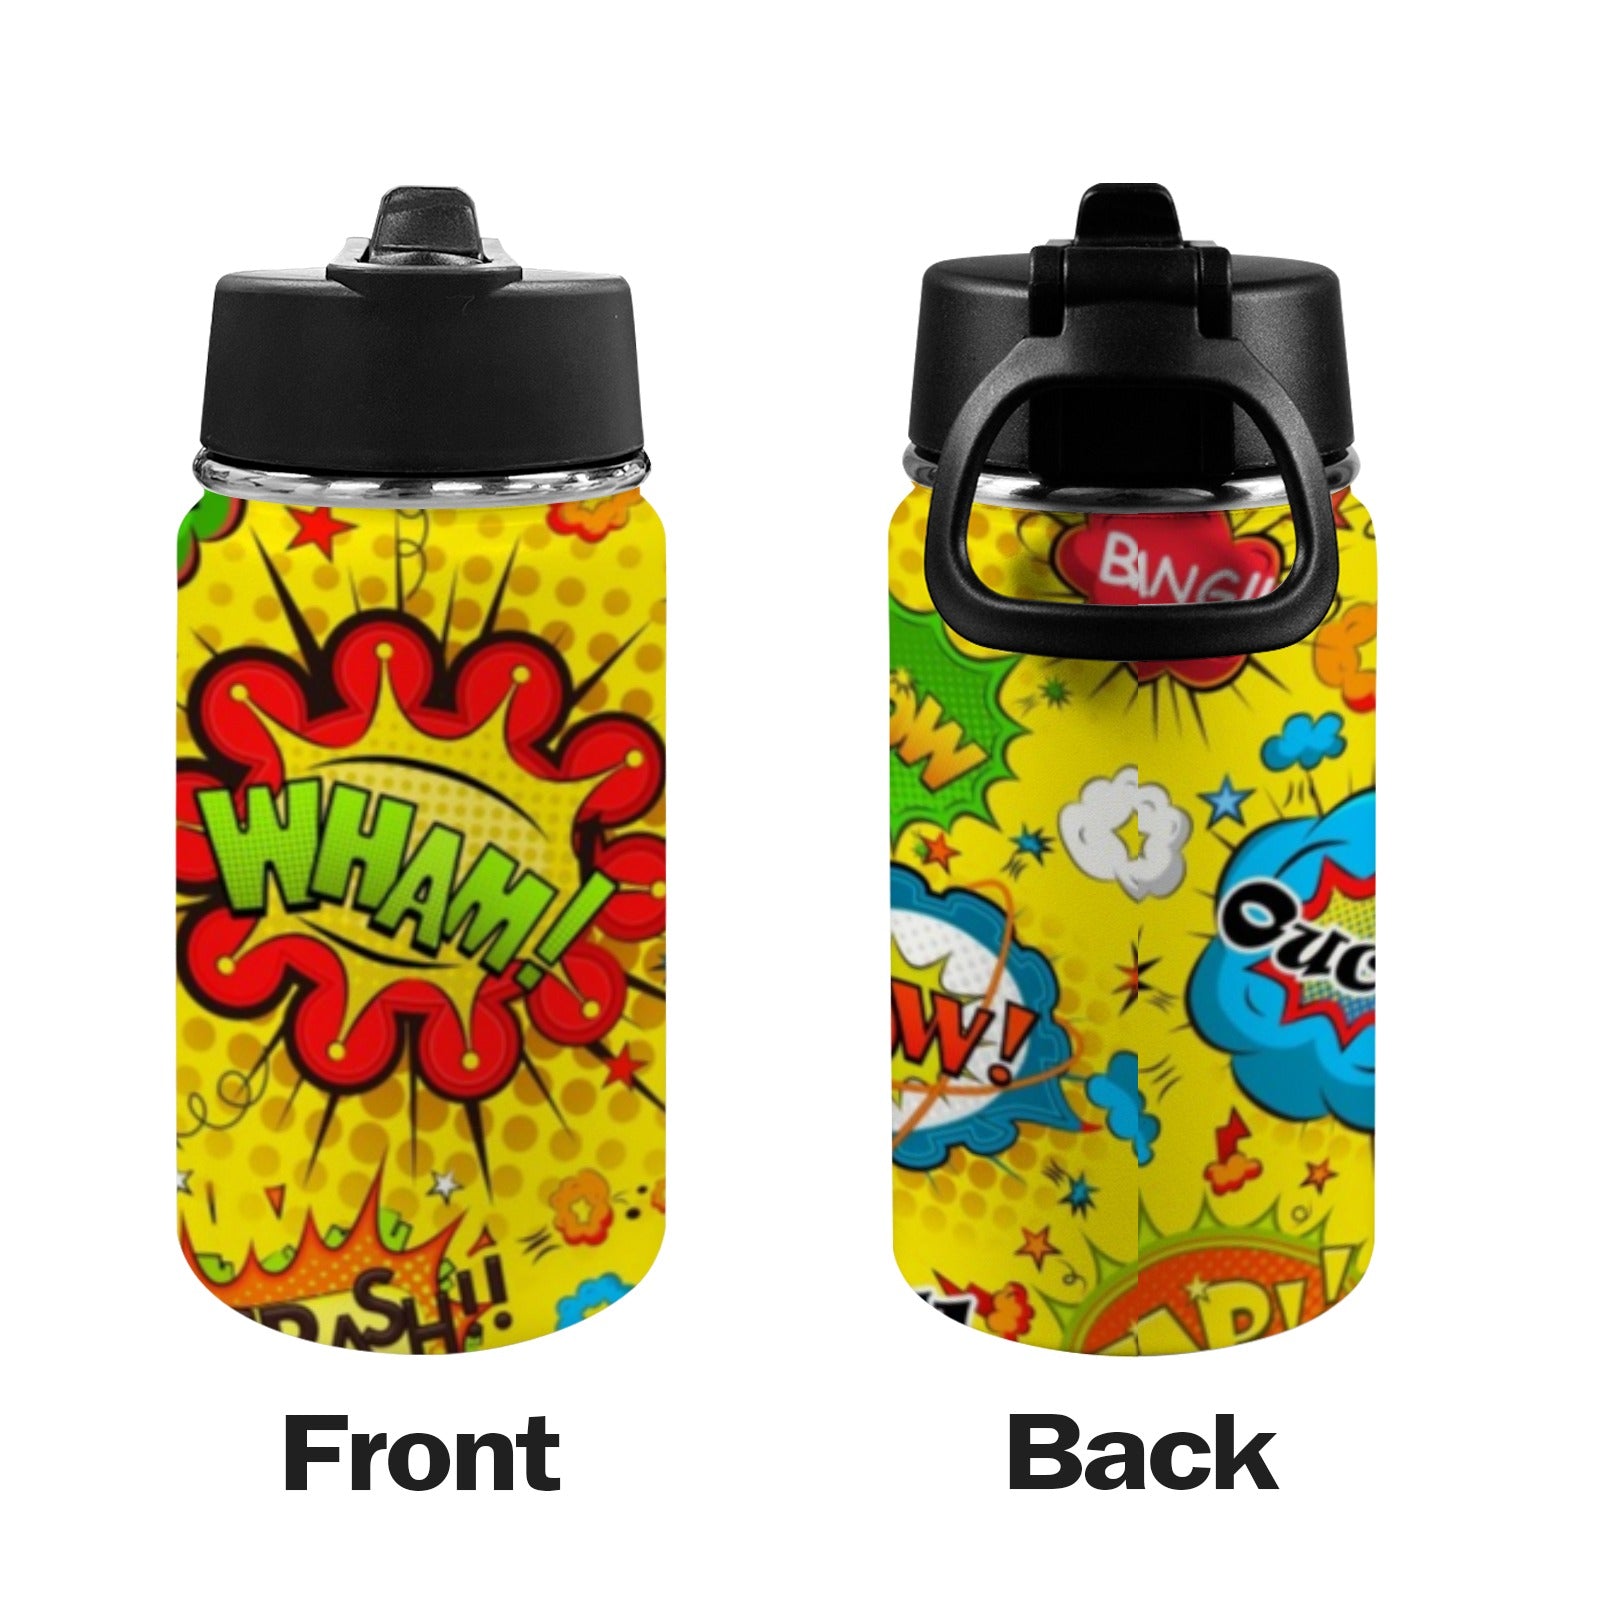 Comic Book Yellow - Kids Water Bottle with Straw Lid (12 oz) Kids Water Bottle with Straw Lid